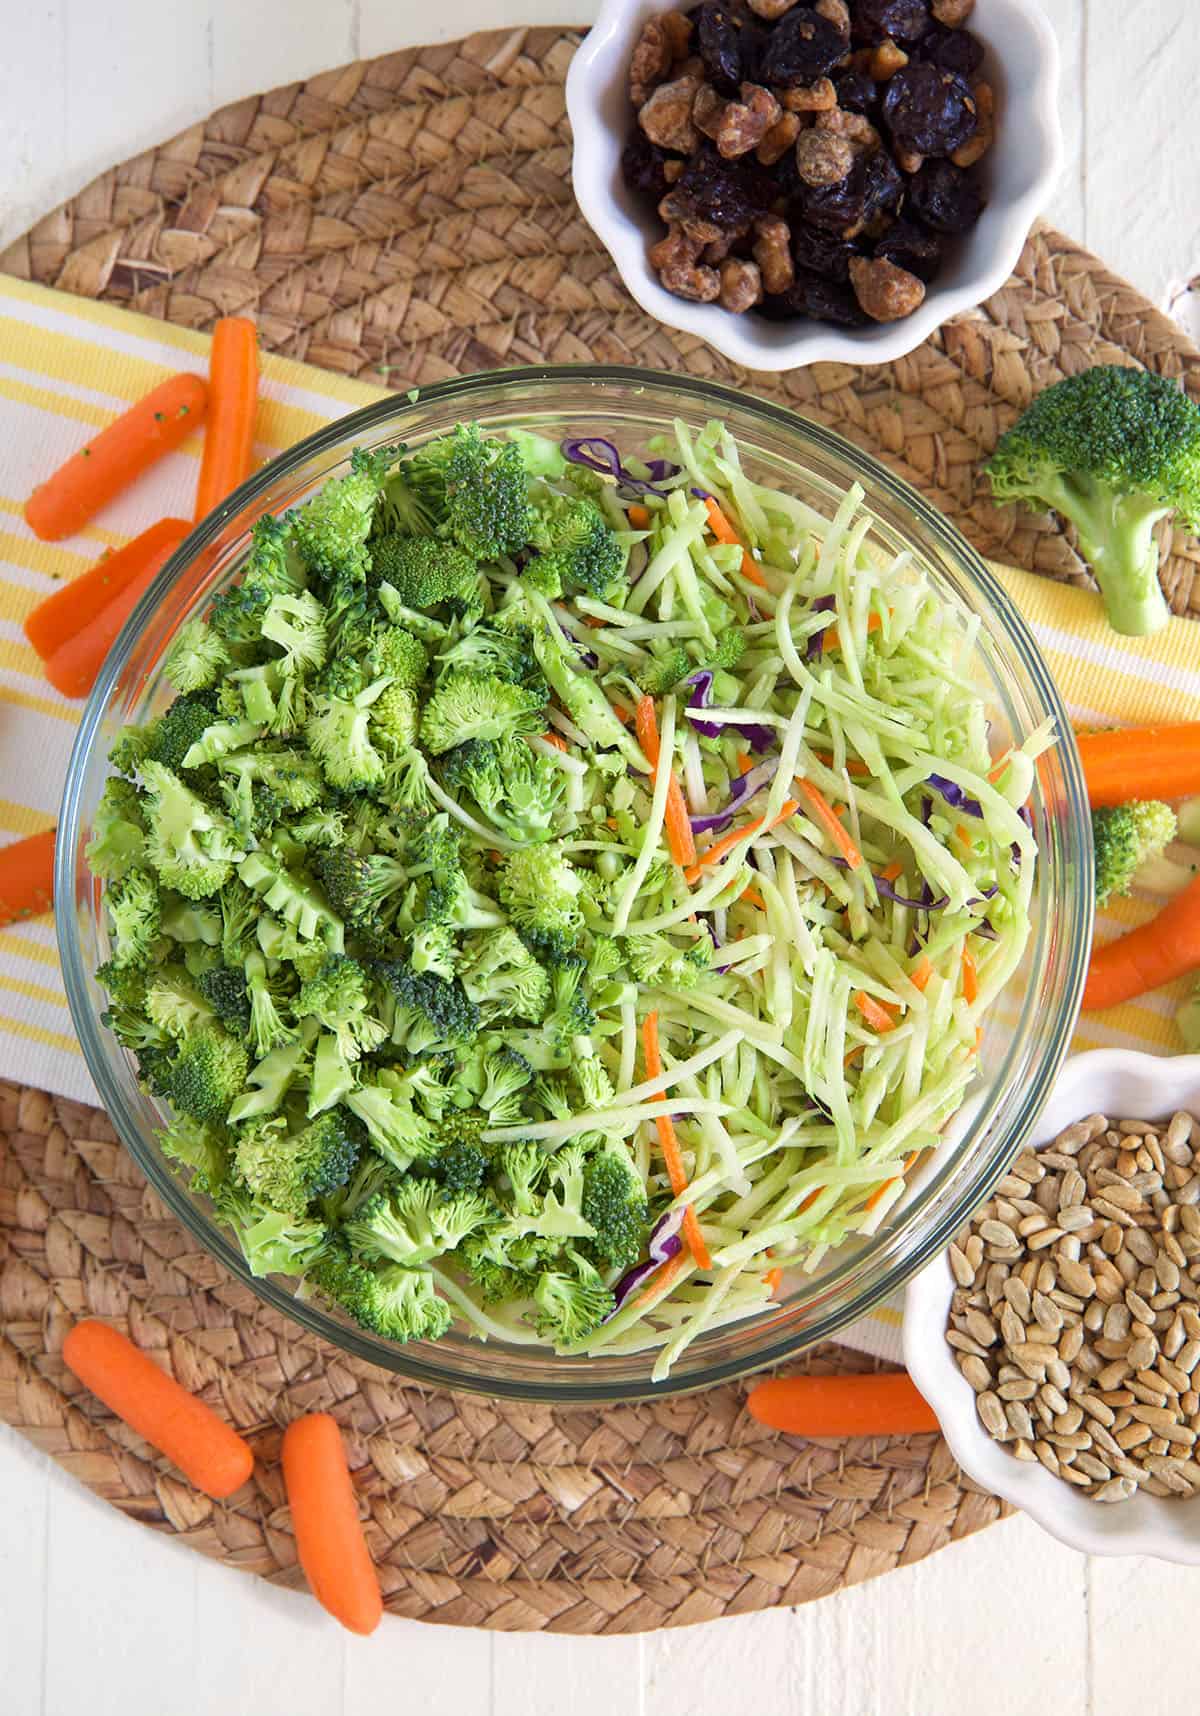 A large bowl is filled with the ingredients for broccoli slaw.